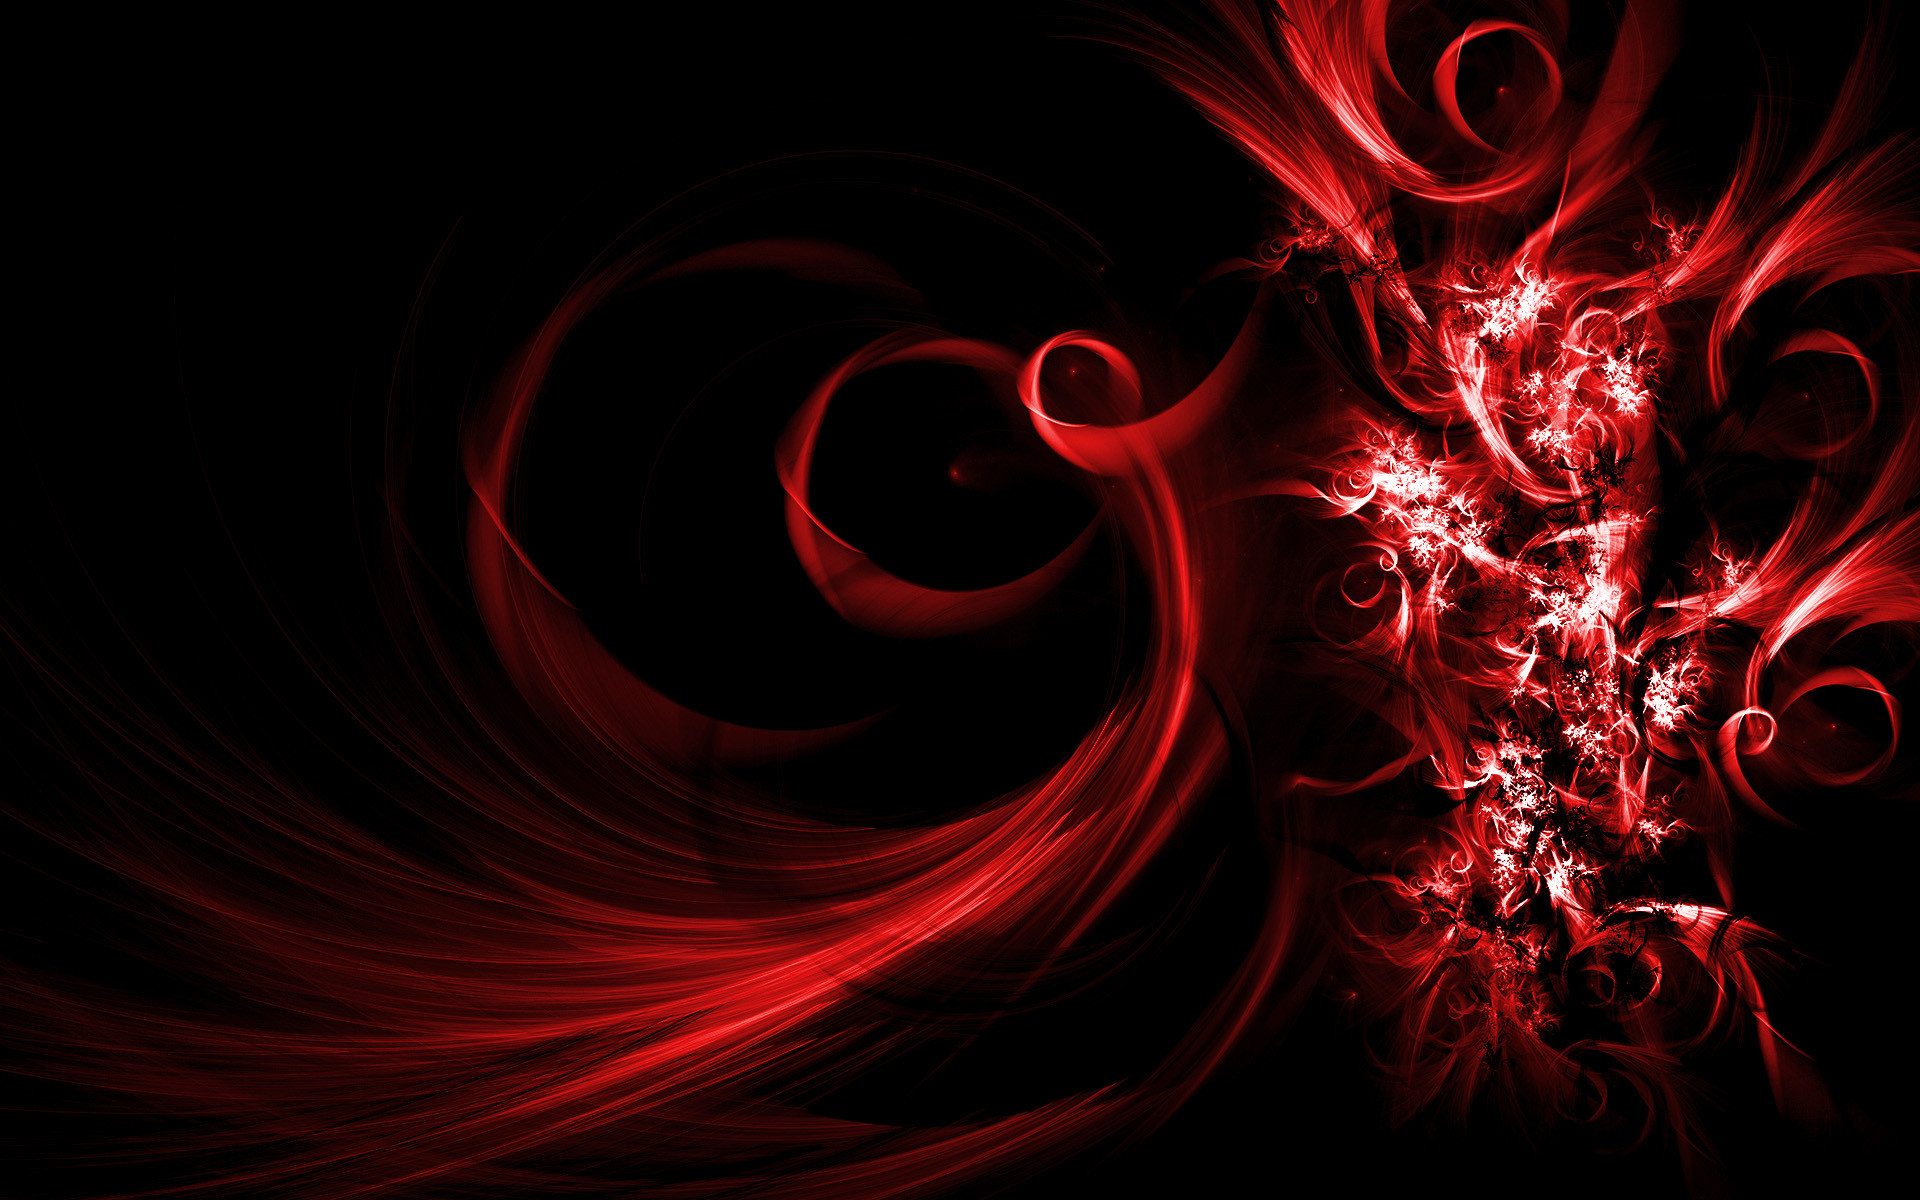 1920x1200 Red And Black Wallpaper Designs 12 Free Hd Wallpaper